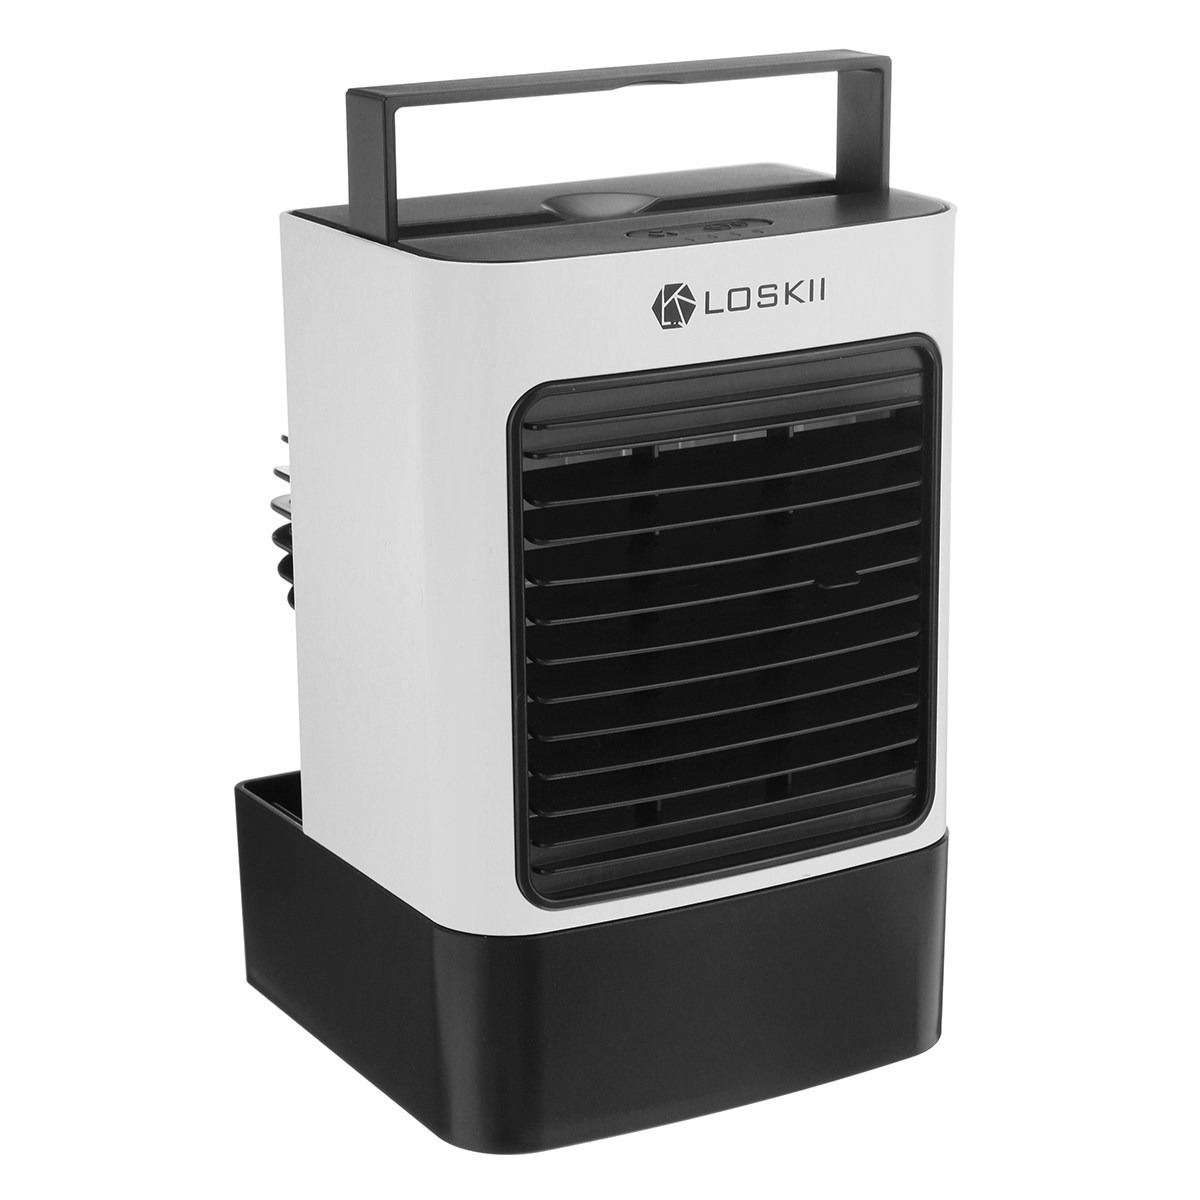 Loskii-F830-Negative-Ion-Air-Conditioner-Air-Cooler-Desktop-Electric-Fan-Two-Blowing-Modes-Three-Gea-1826132-4